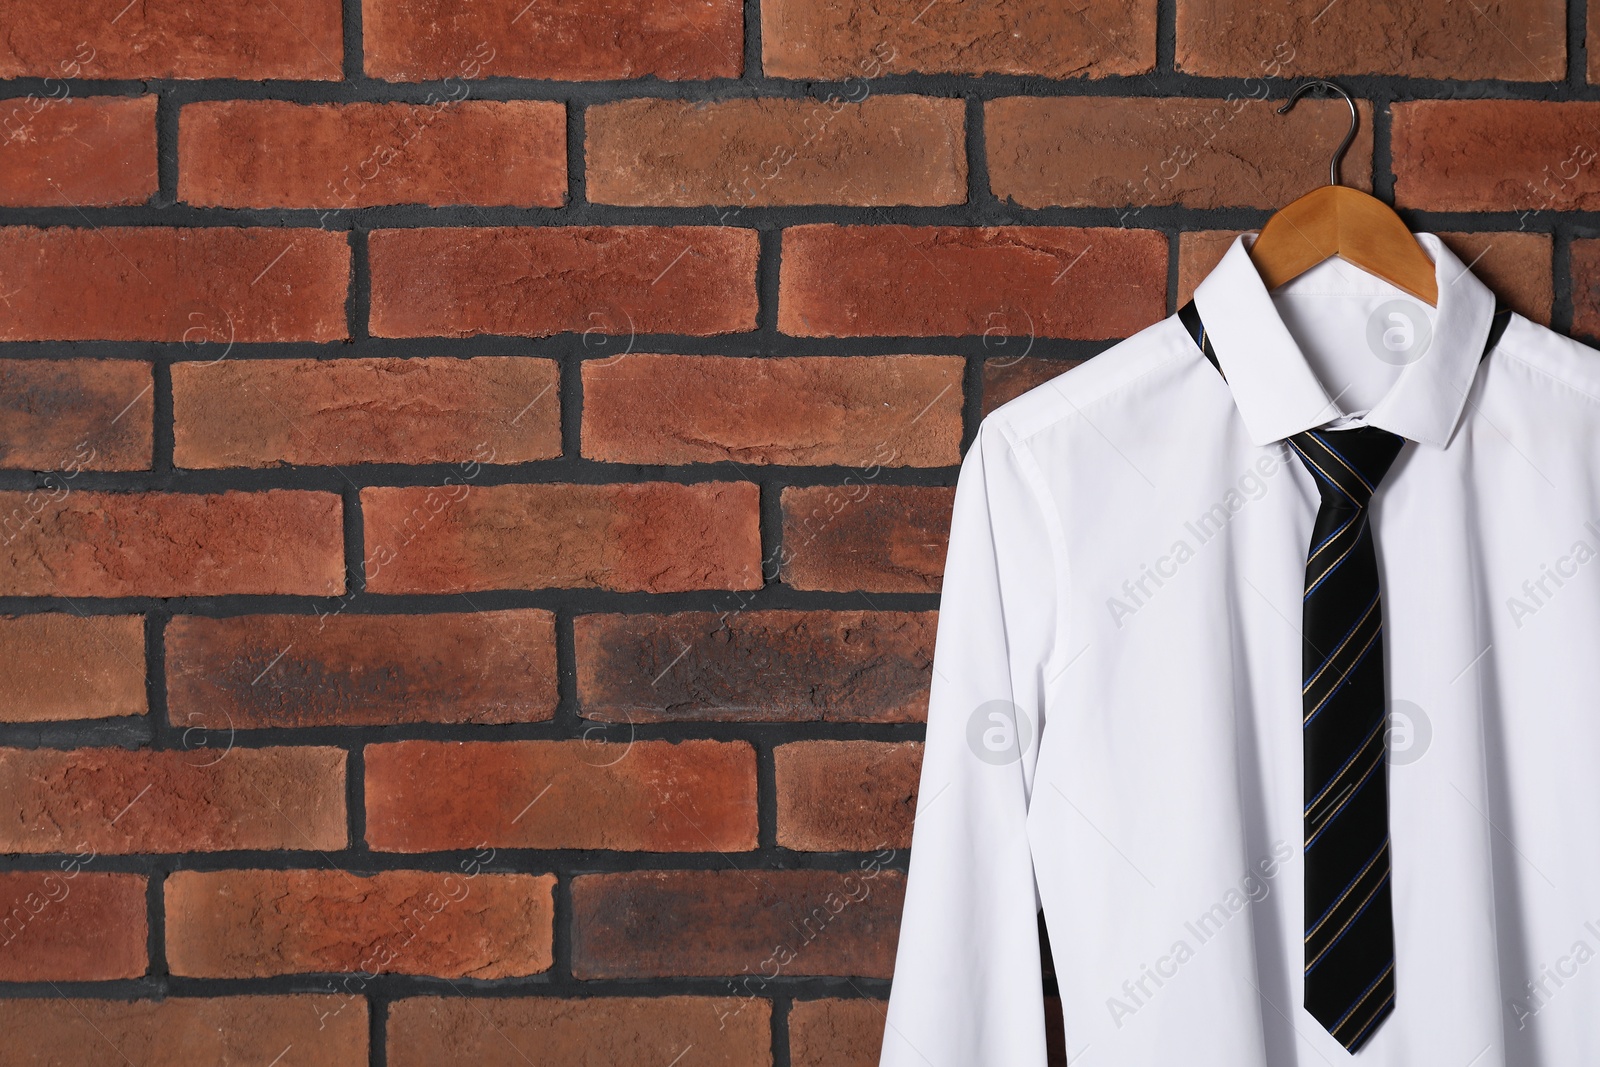 Photo of Hanger with white shirt and striped necktie on red brick wall, space for text